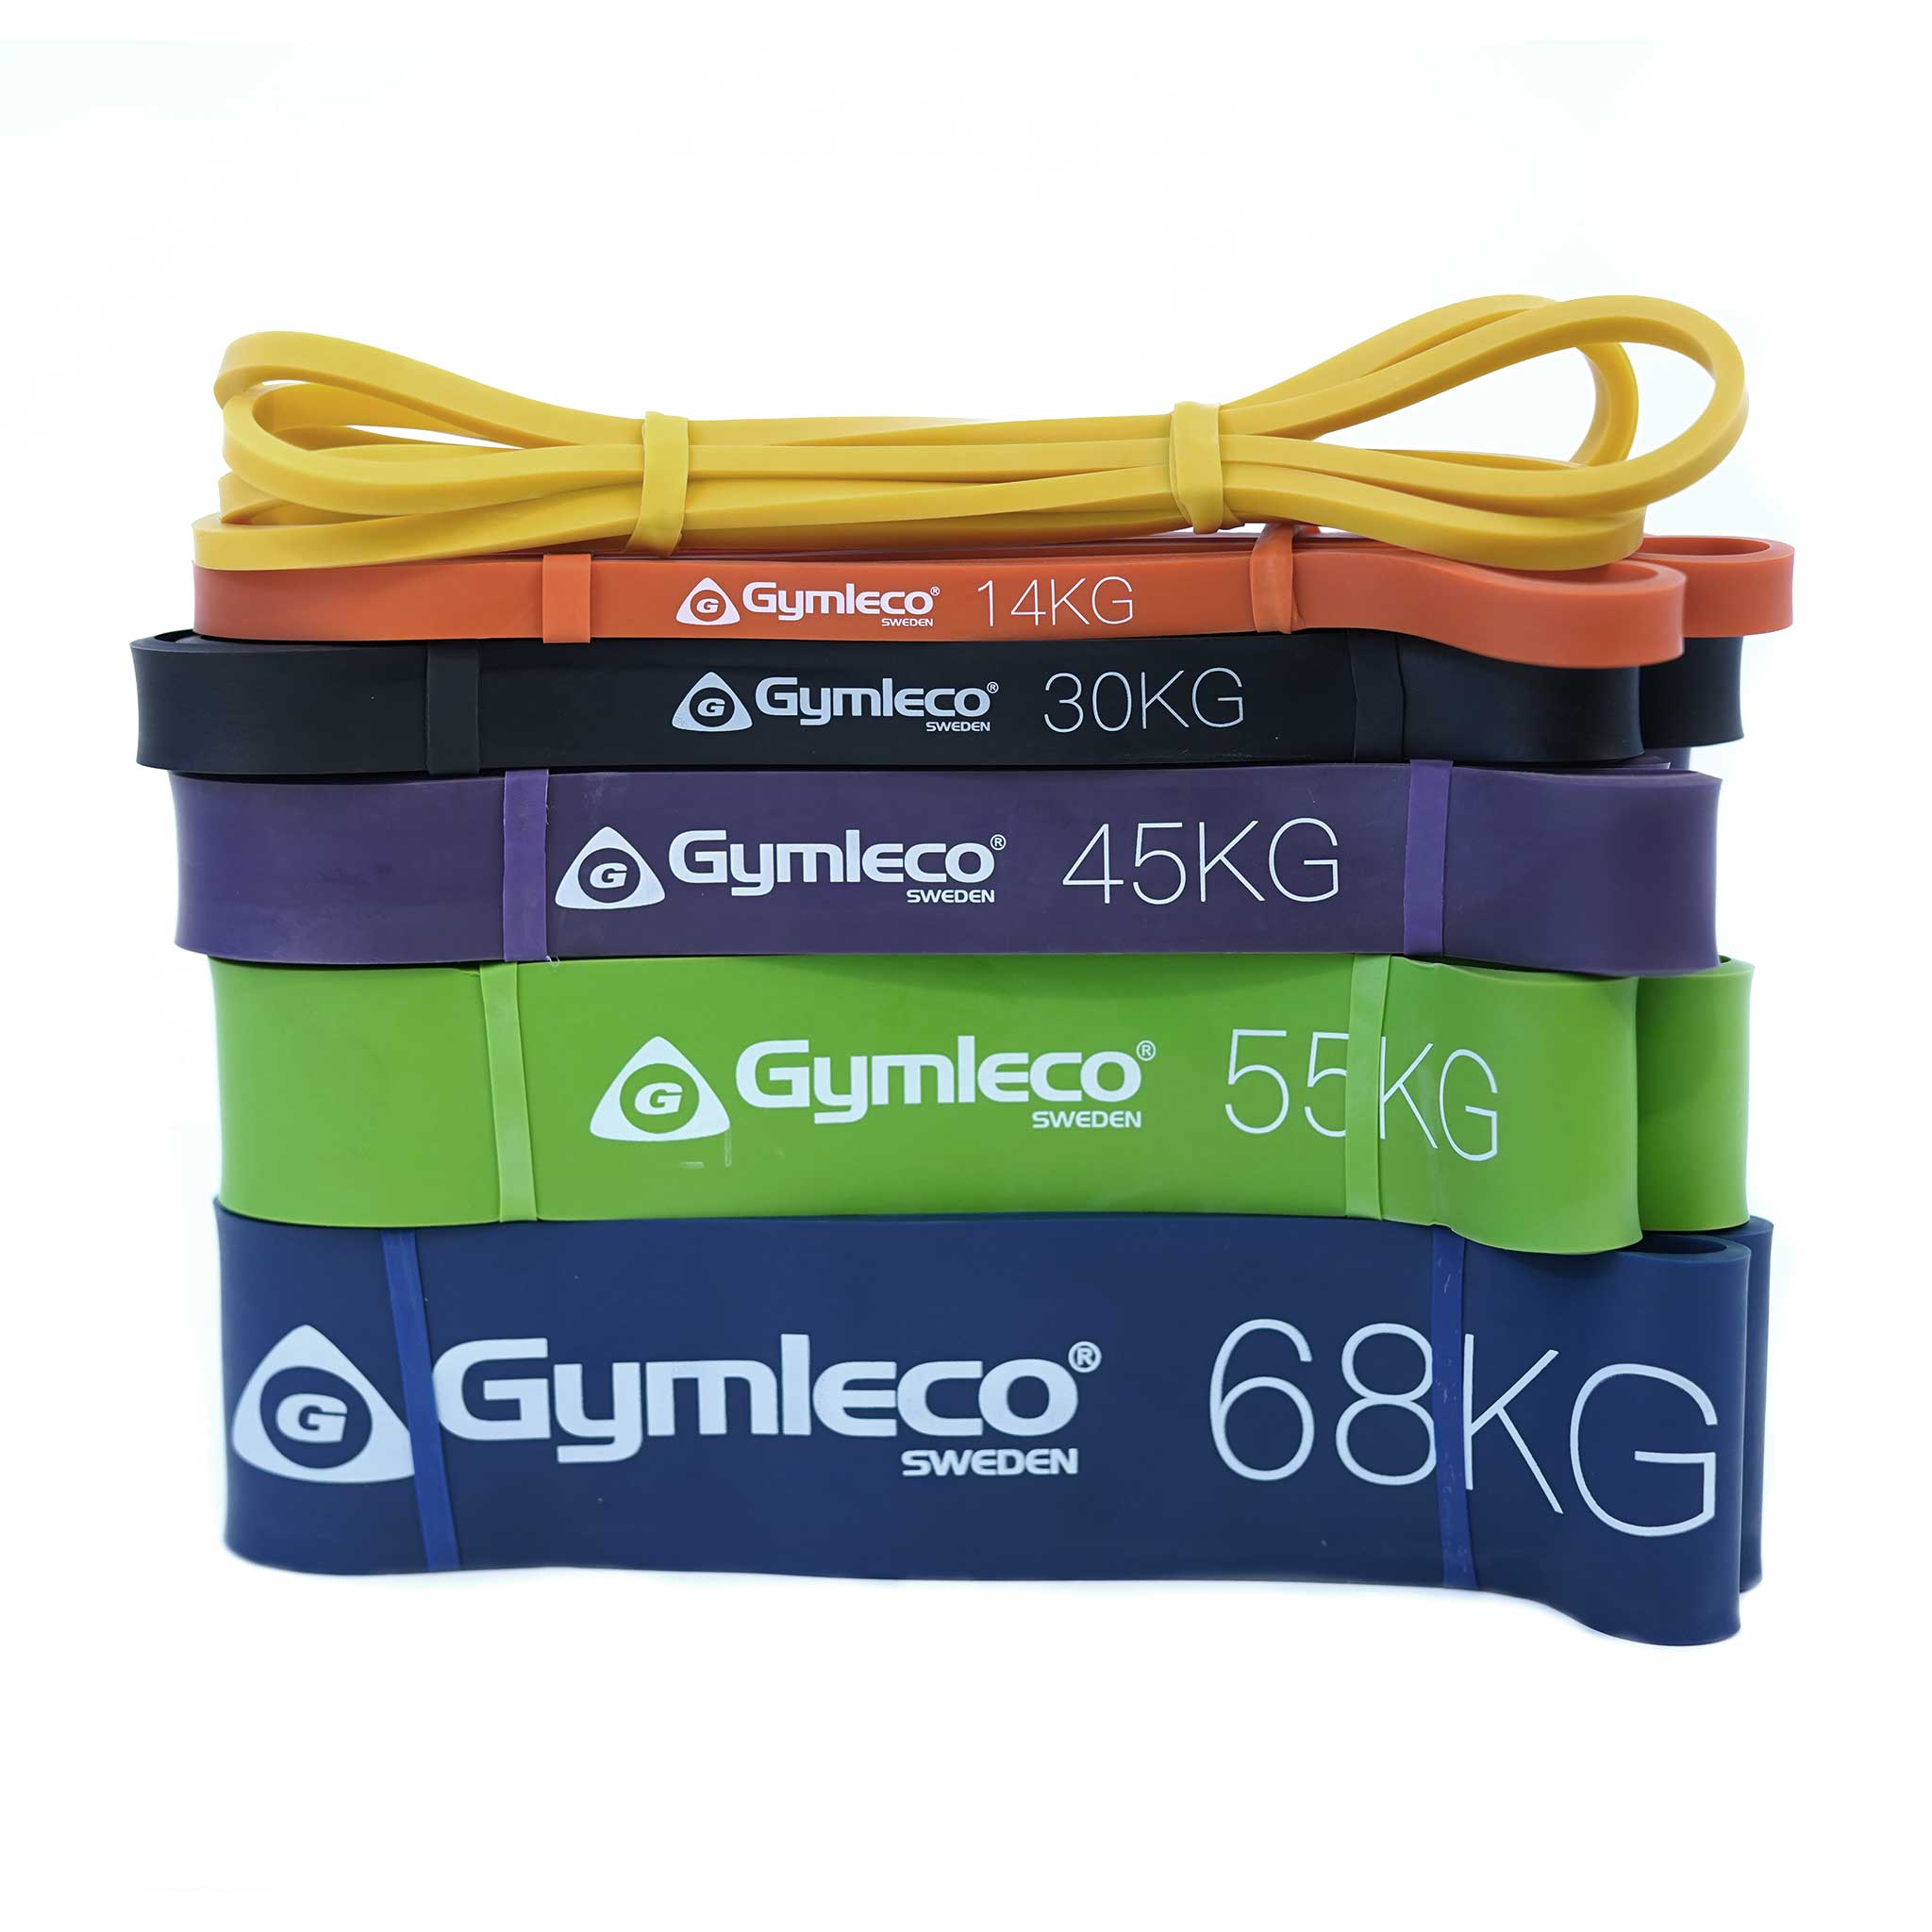 Resistance bands in different weights from Gymleco